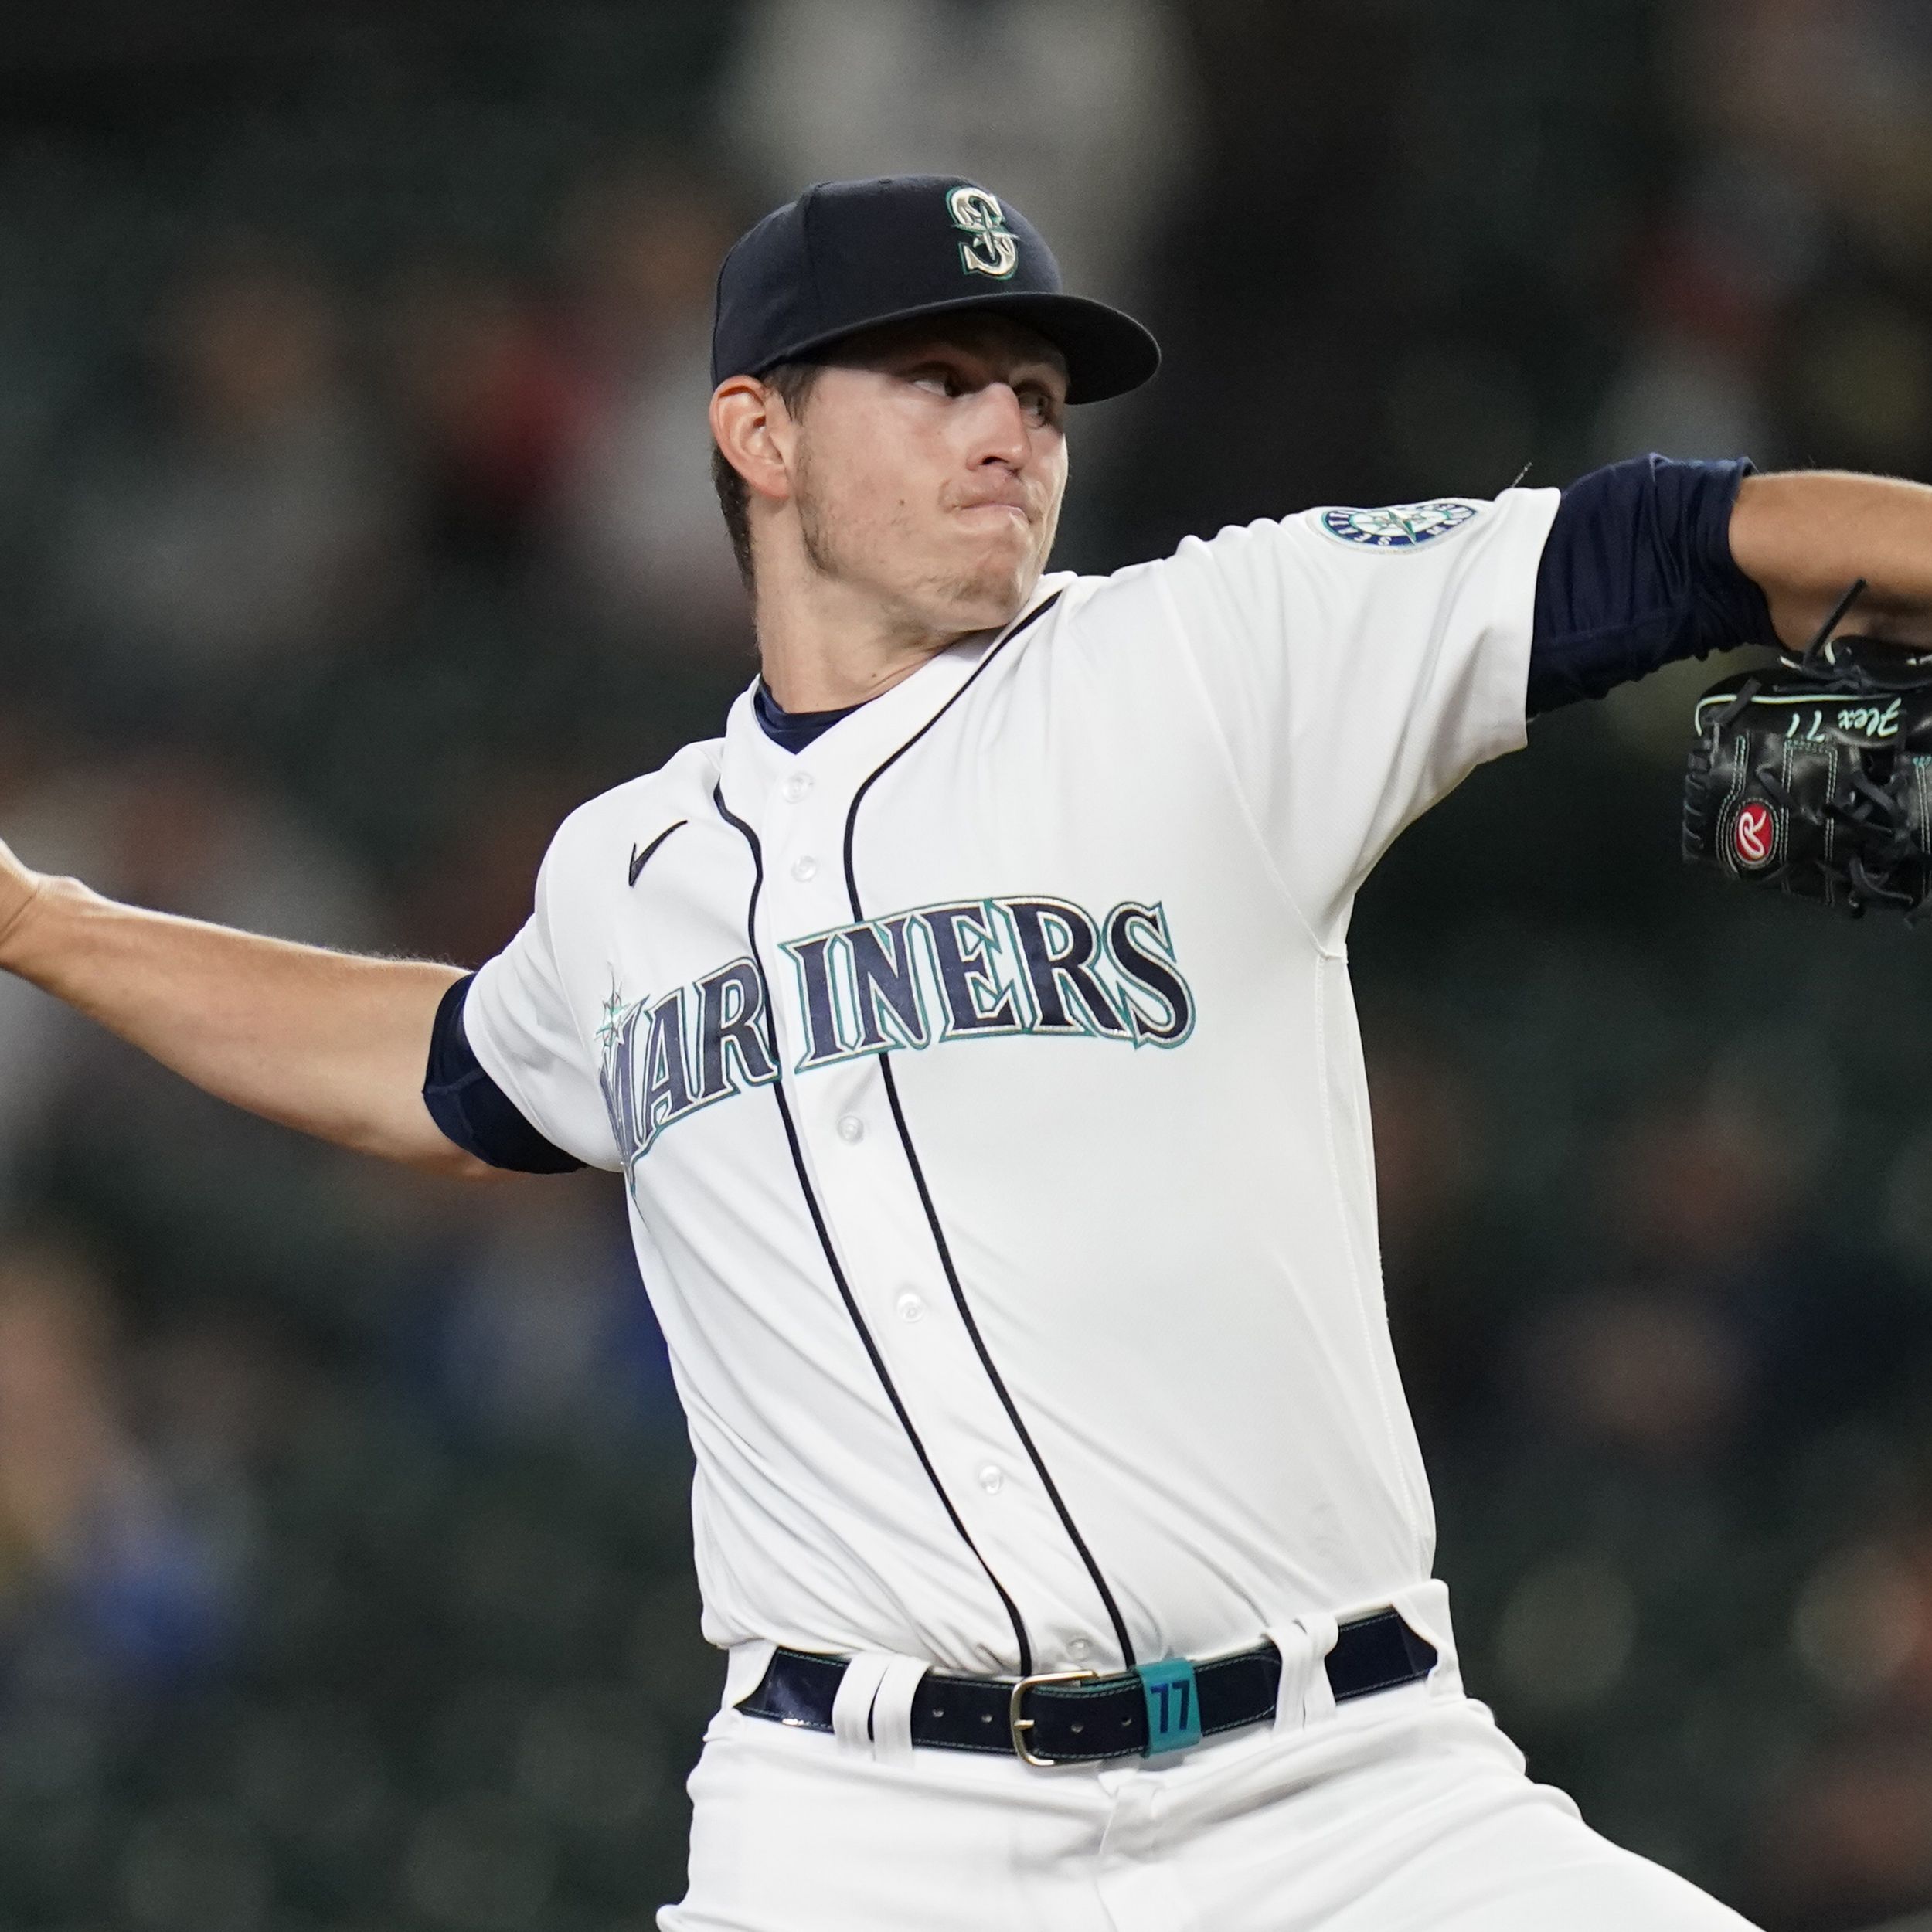 The Mariners nab RHP Chris Flexen, one of the KBO's best, on 2